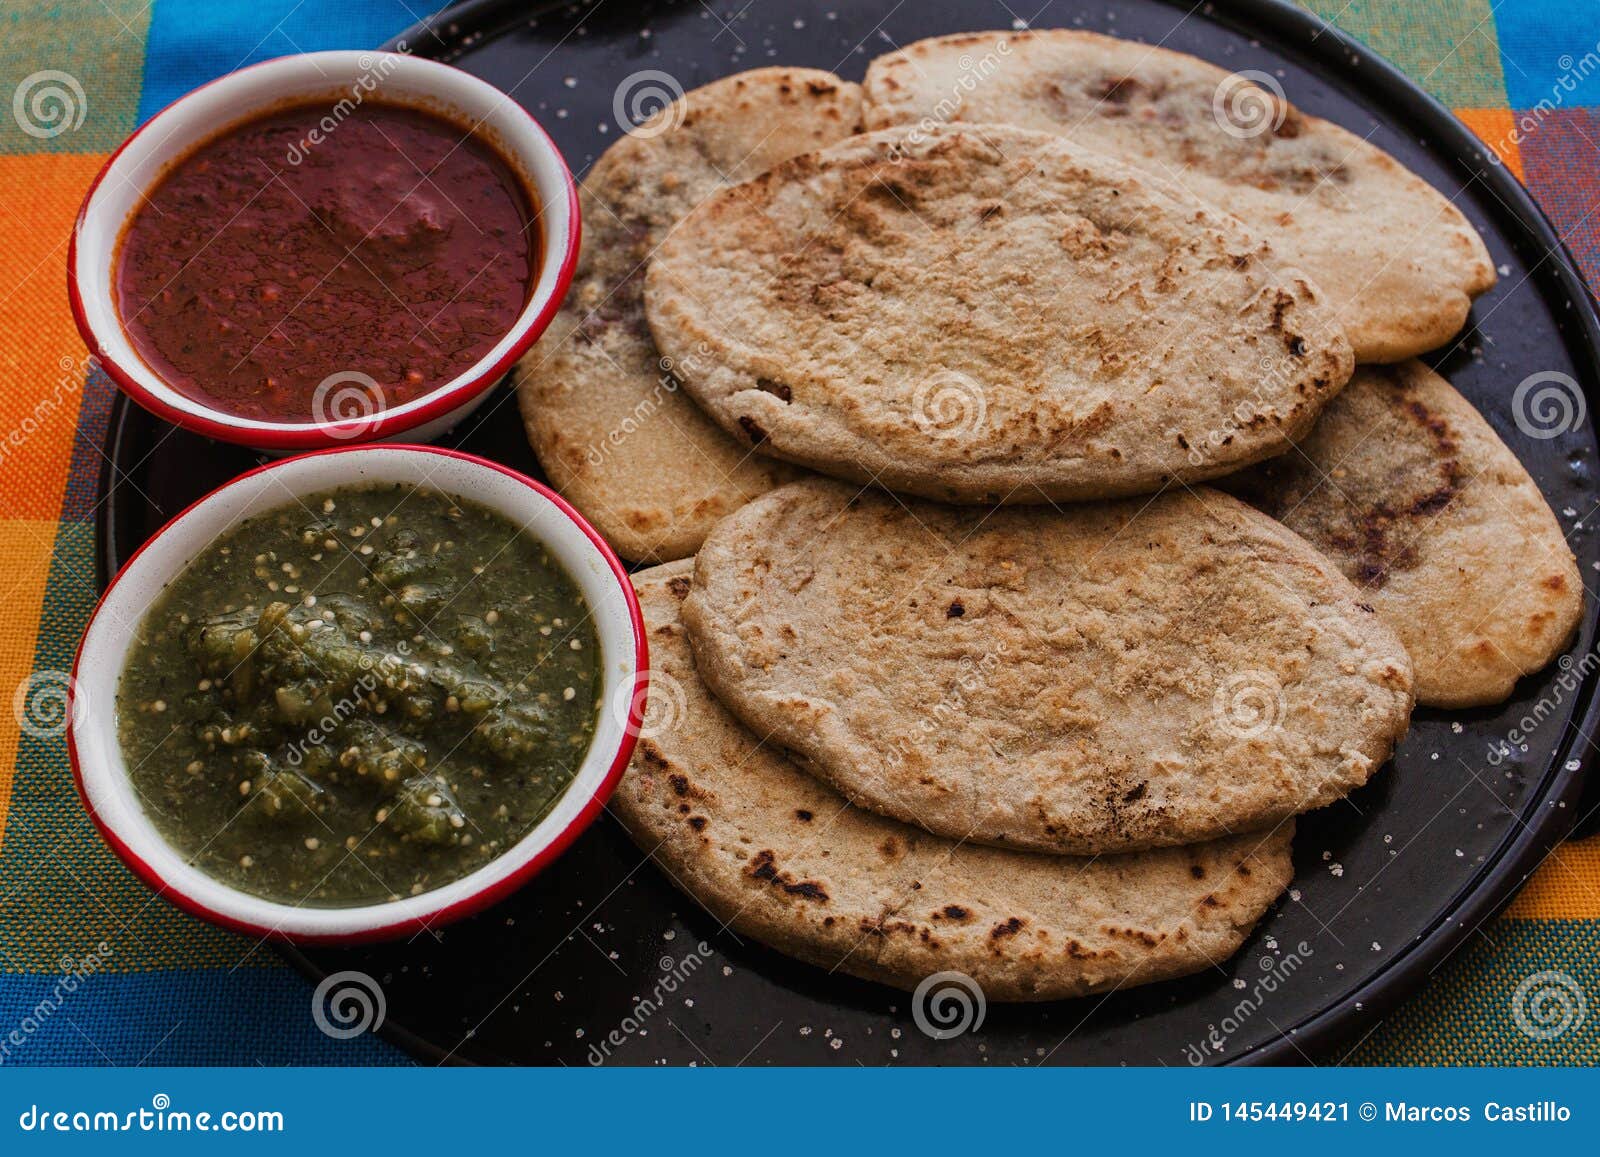 mexican tlacoyos with green and red sauce, traditional food in mexico